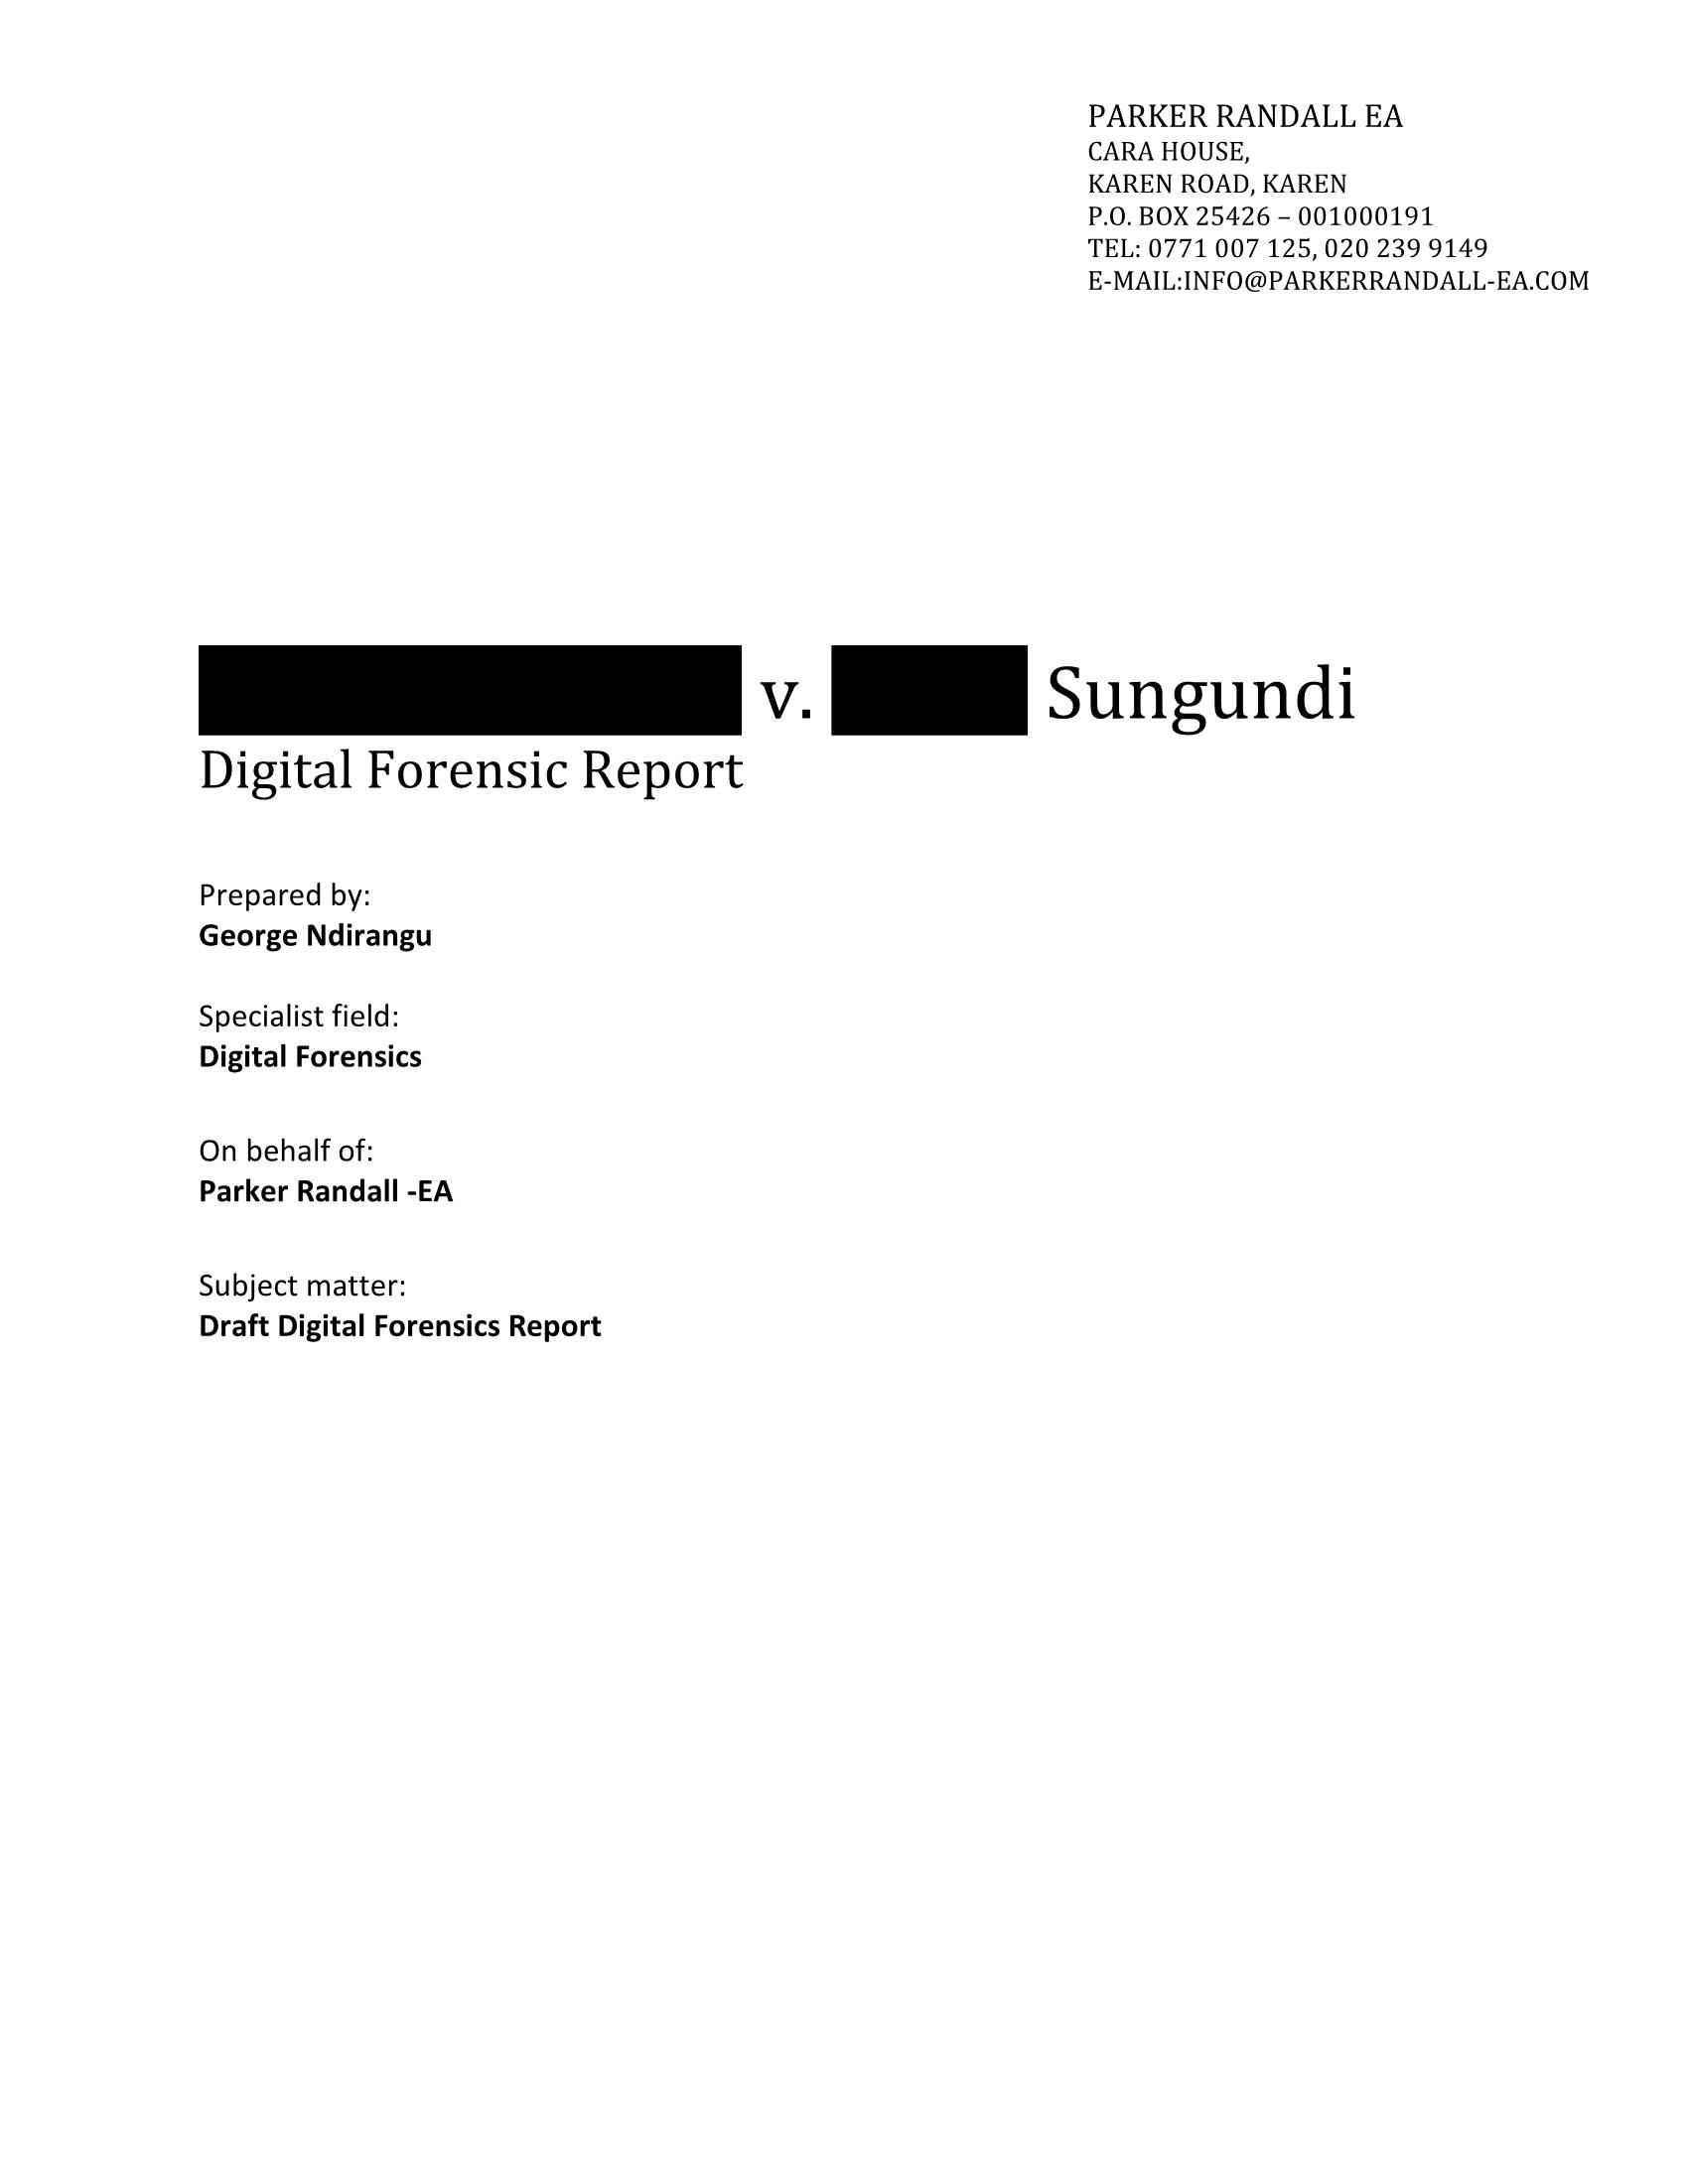 Forensic Report Template – Horizonconsulting.co Intended For Forensic Report Template